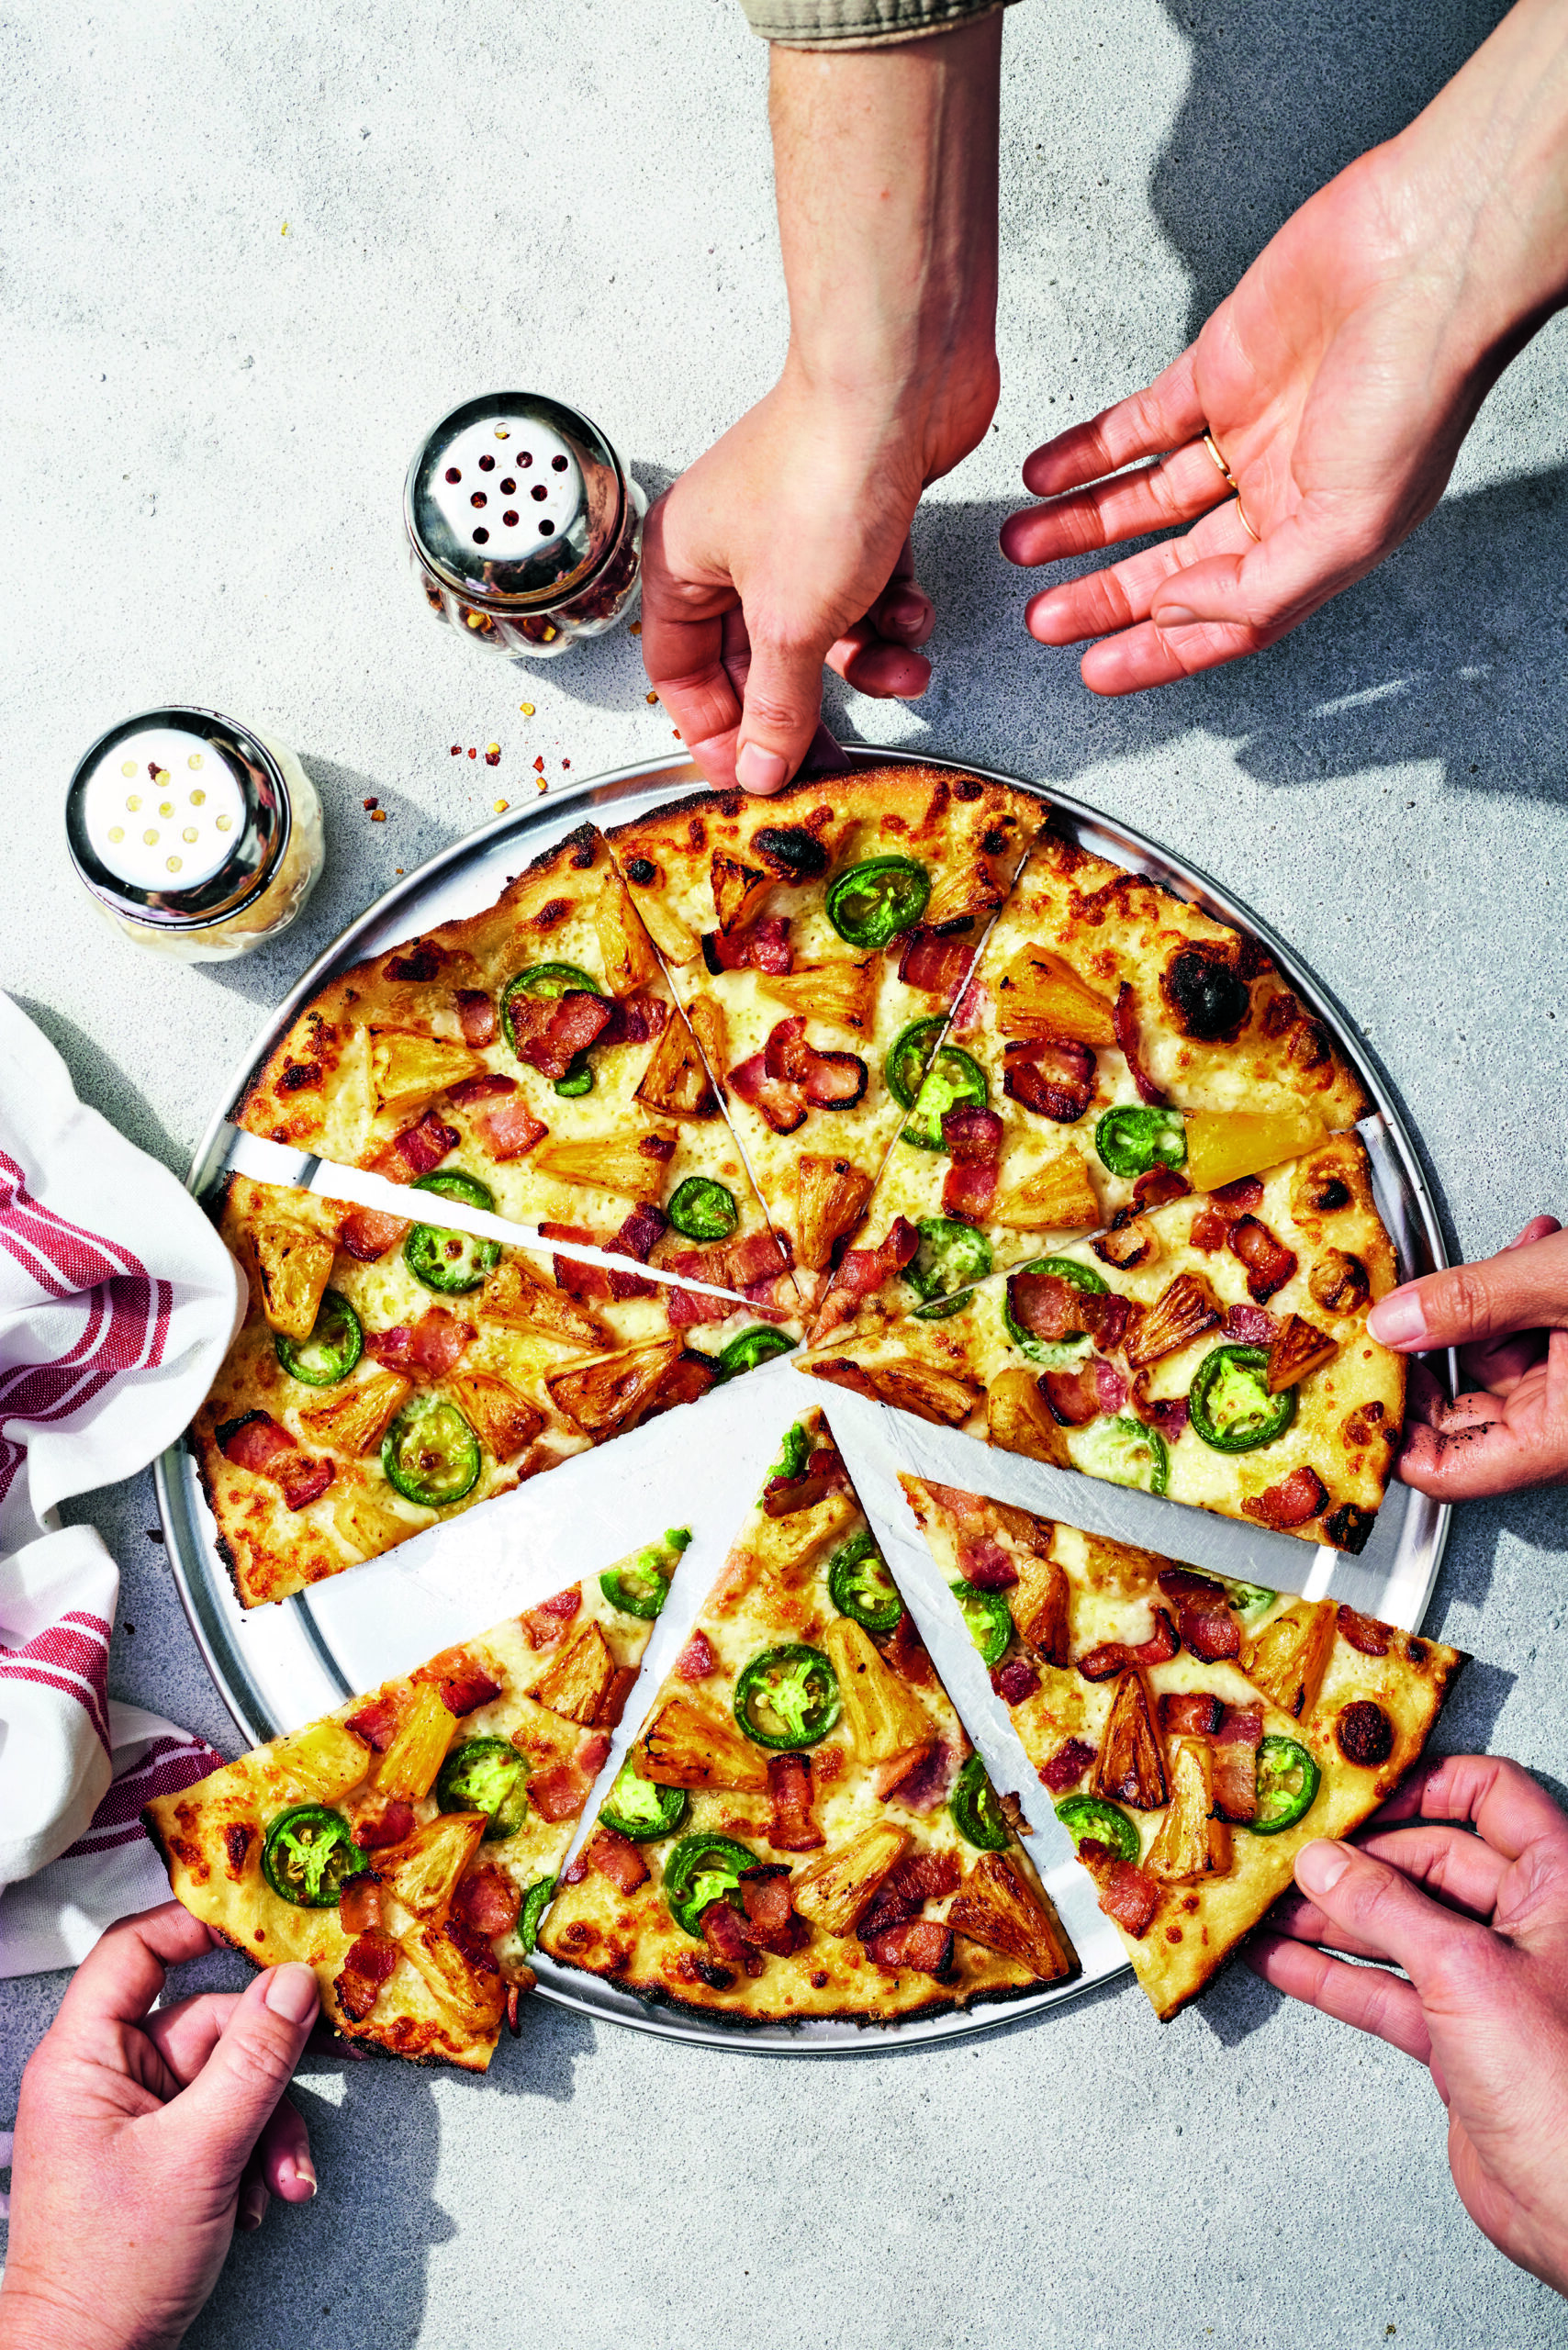 Pineapple Pizza with Bacon and Jalapeños